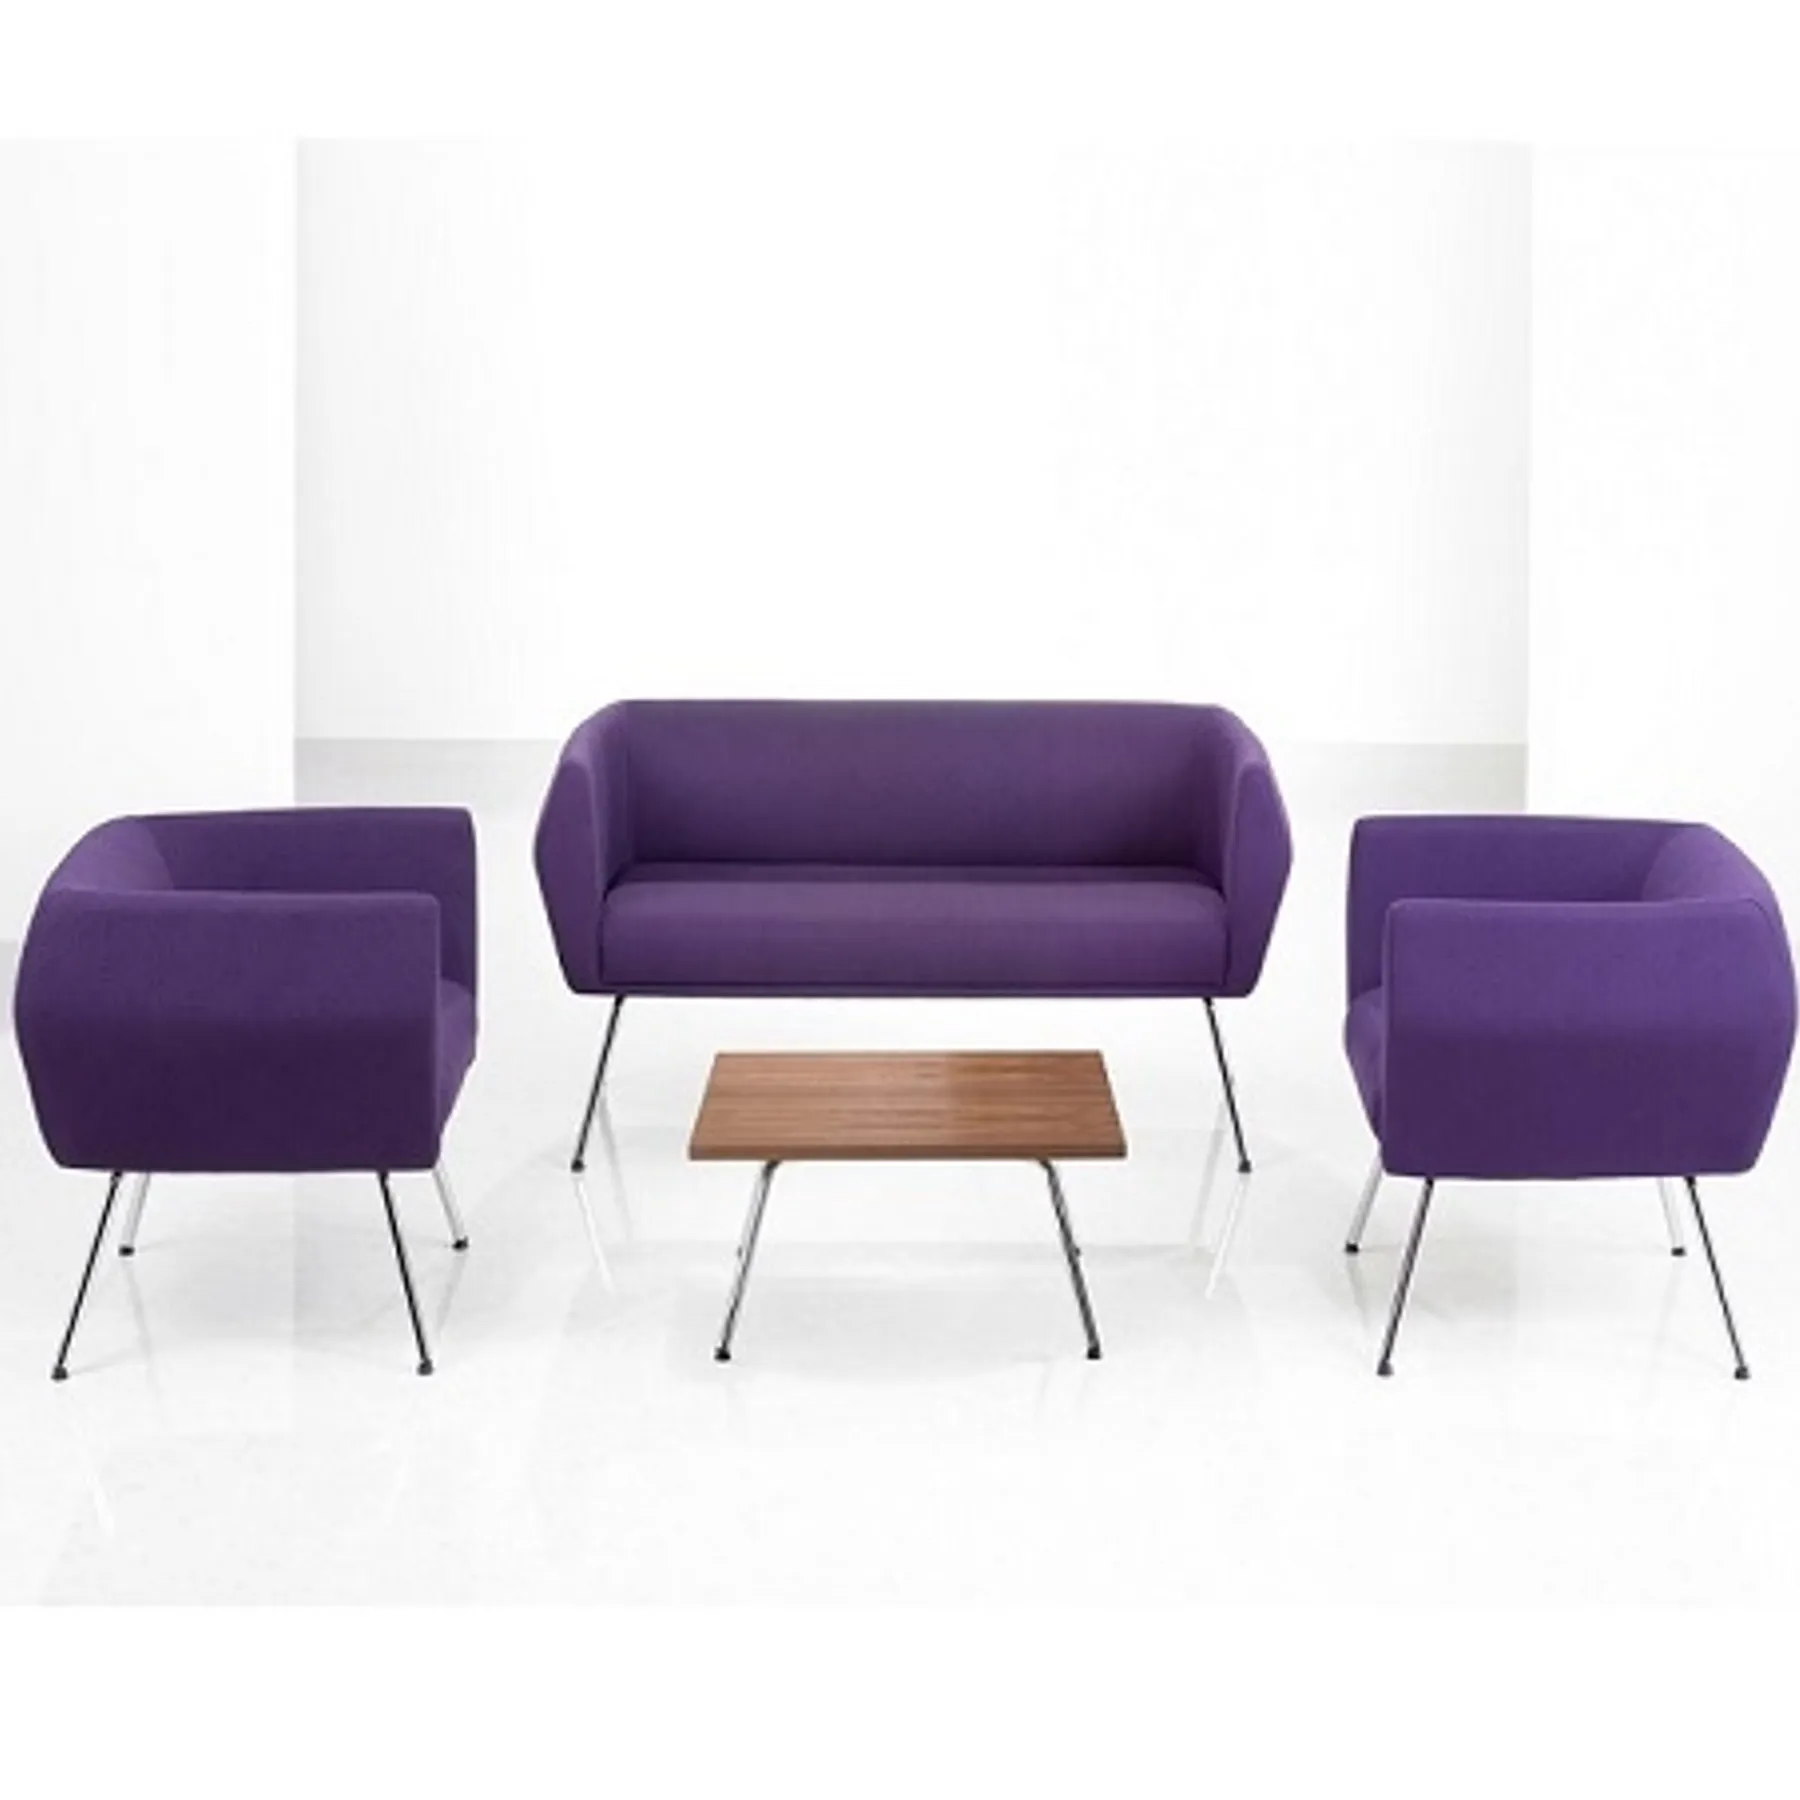 Lof direct Sven Christiansen HB1 Square Coffee Table HB1 Seating Roomset Purple Reception